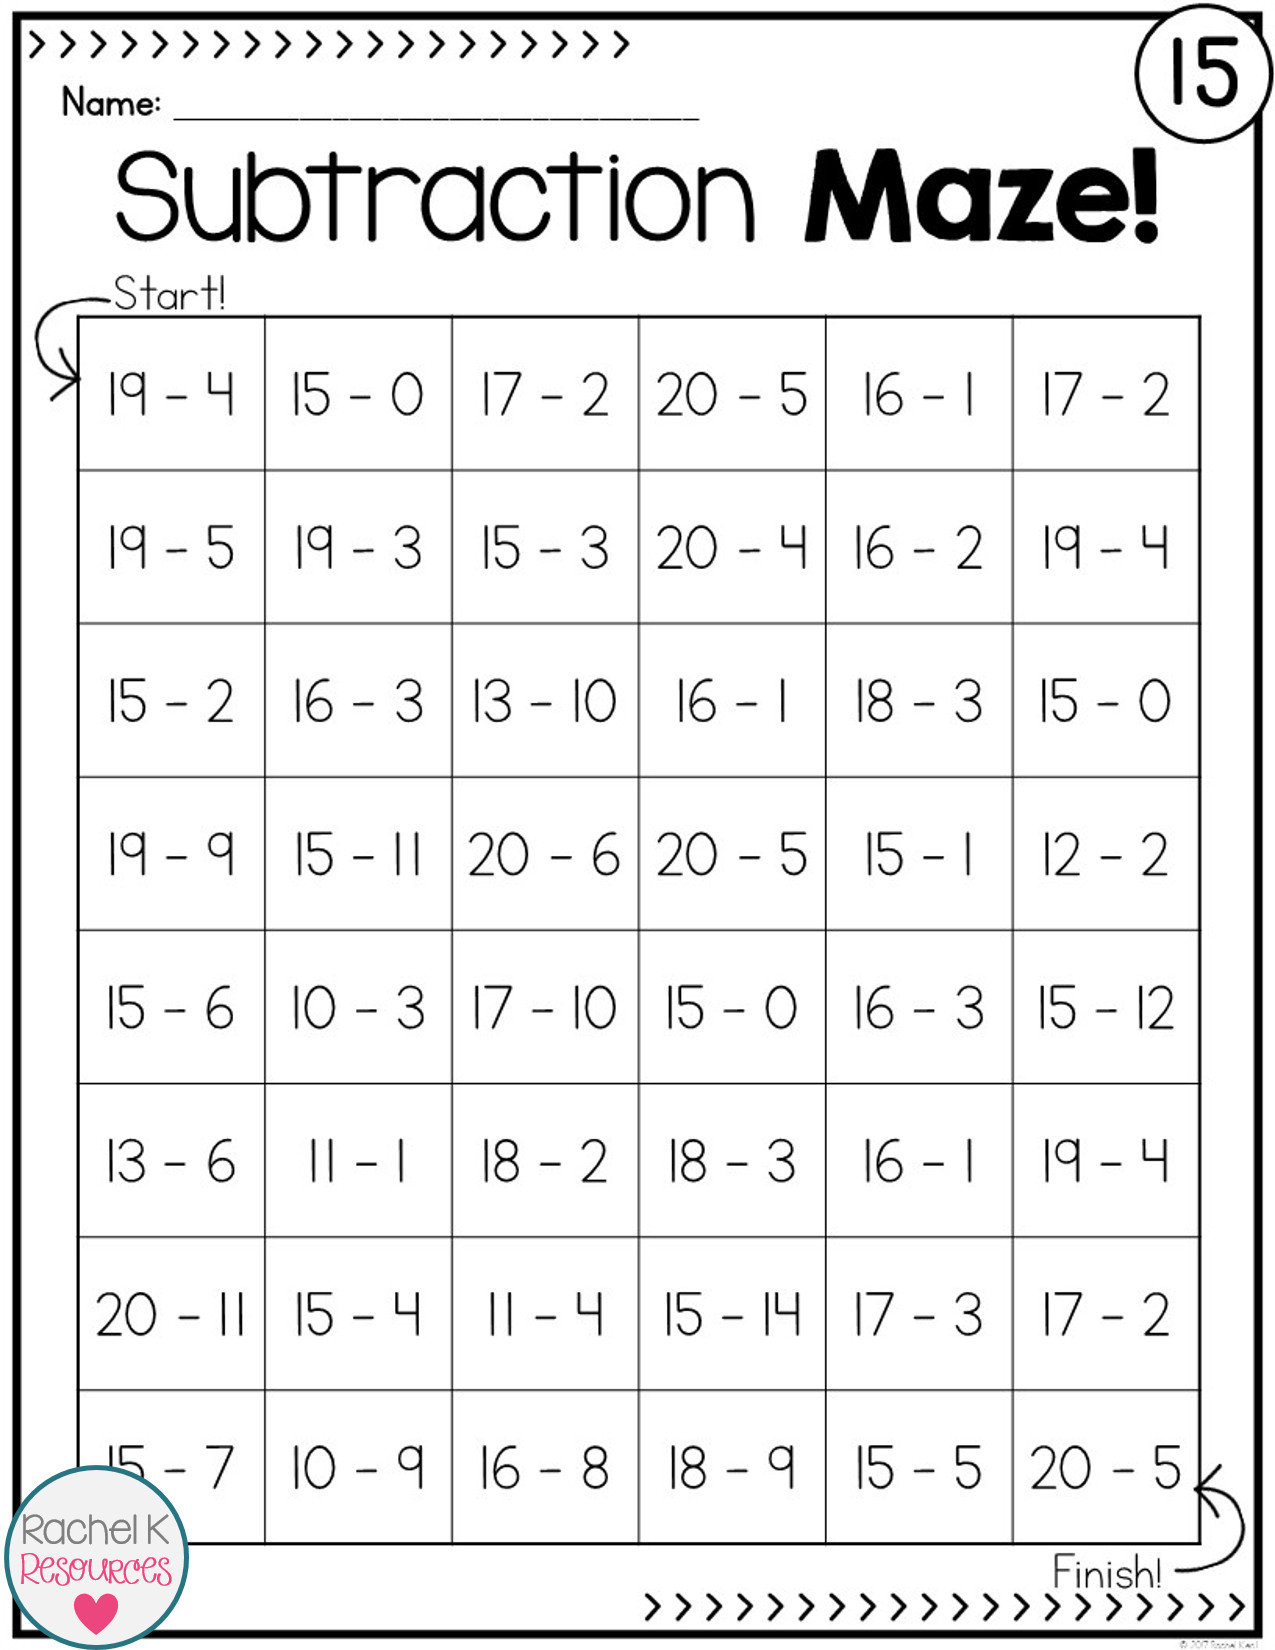 4 Free Math Worksheets Second Grade 2 Addition Adding Whole Tens 3 Digits Missing Number AMP